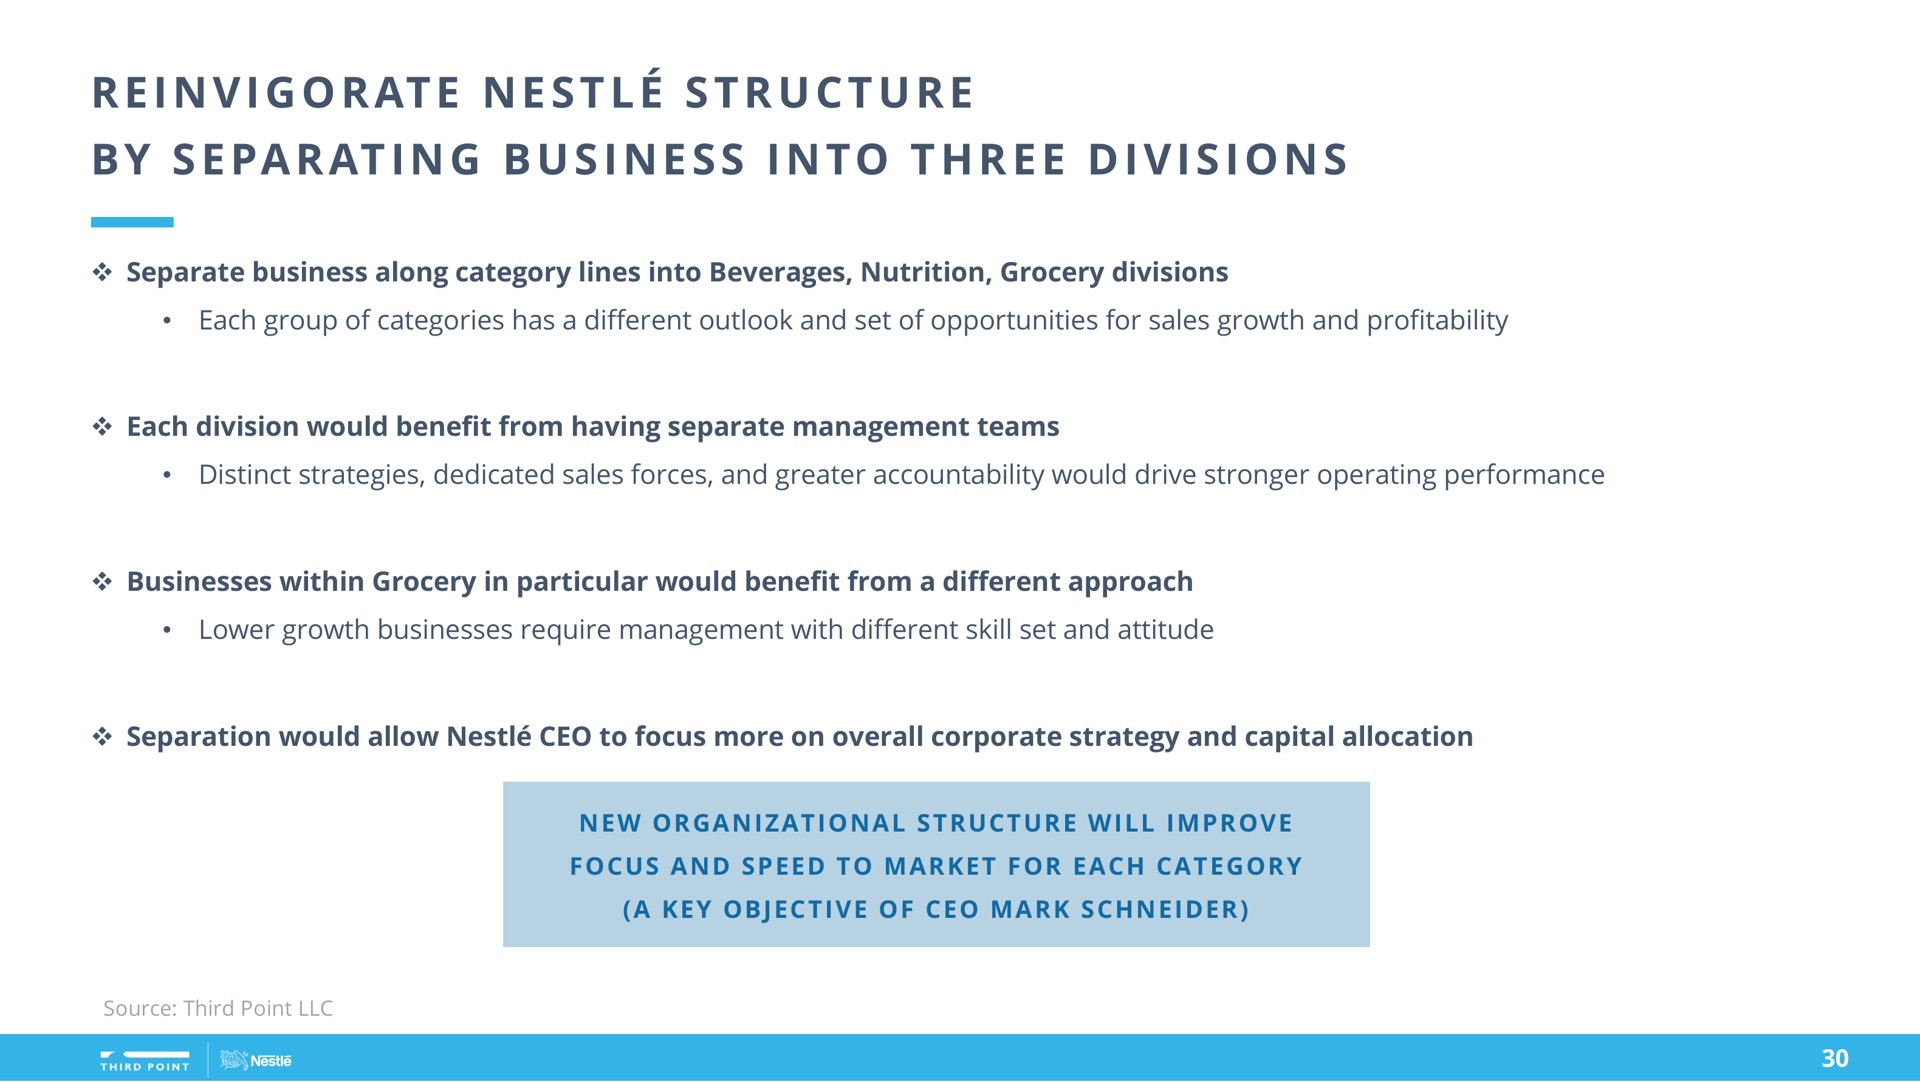 i i at at i i i i i i reinvigorate nestle structure by separating business into three divisions | Third Point Management